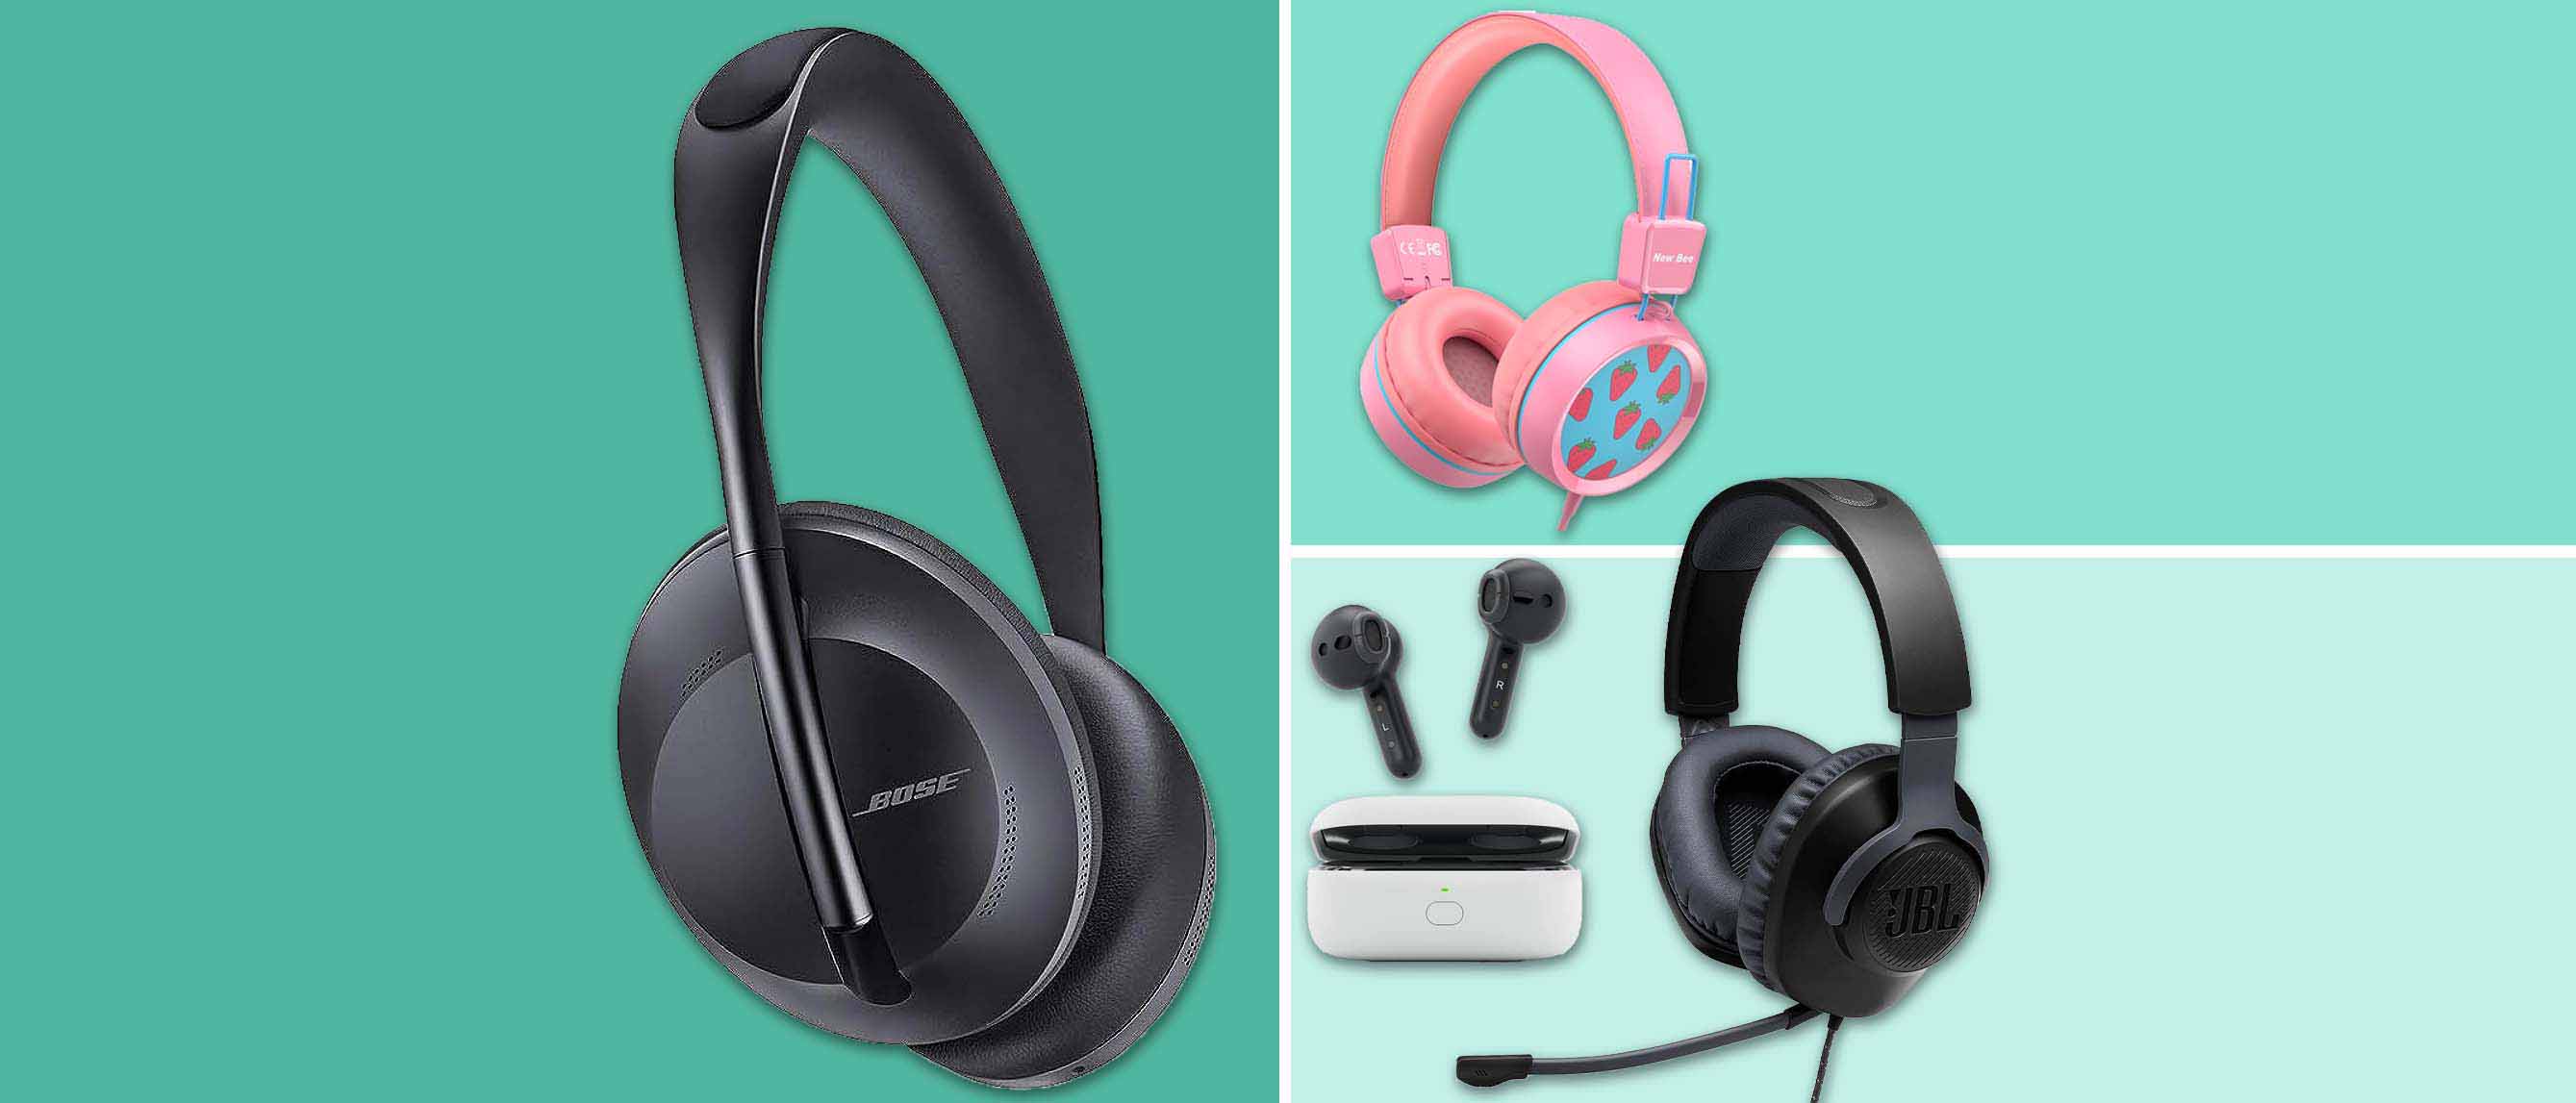 4 pairs of headphones on teal background